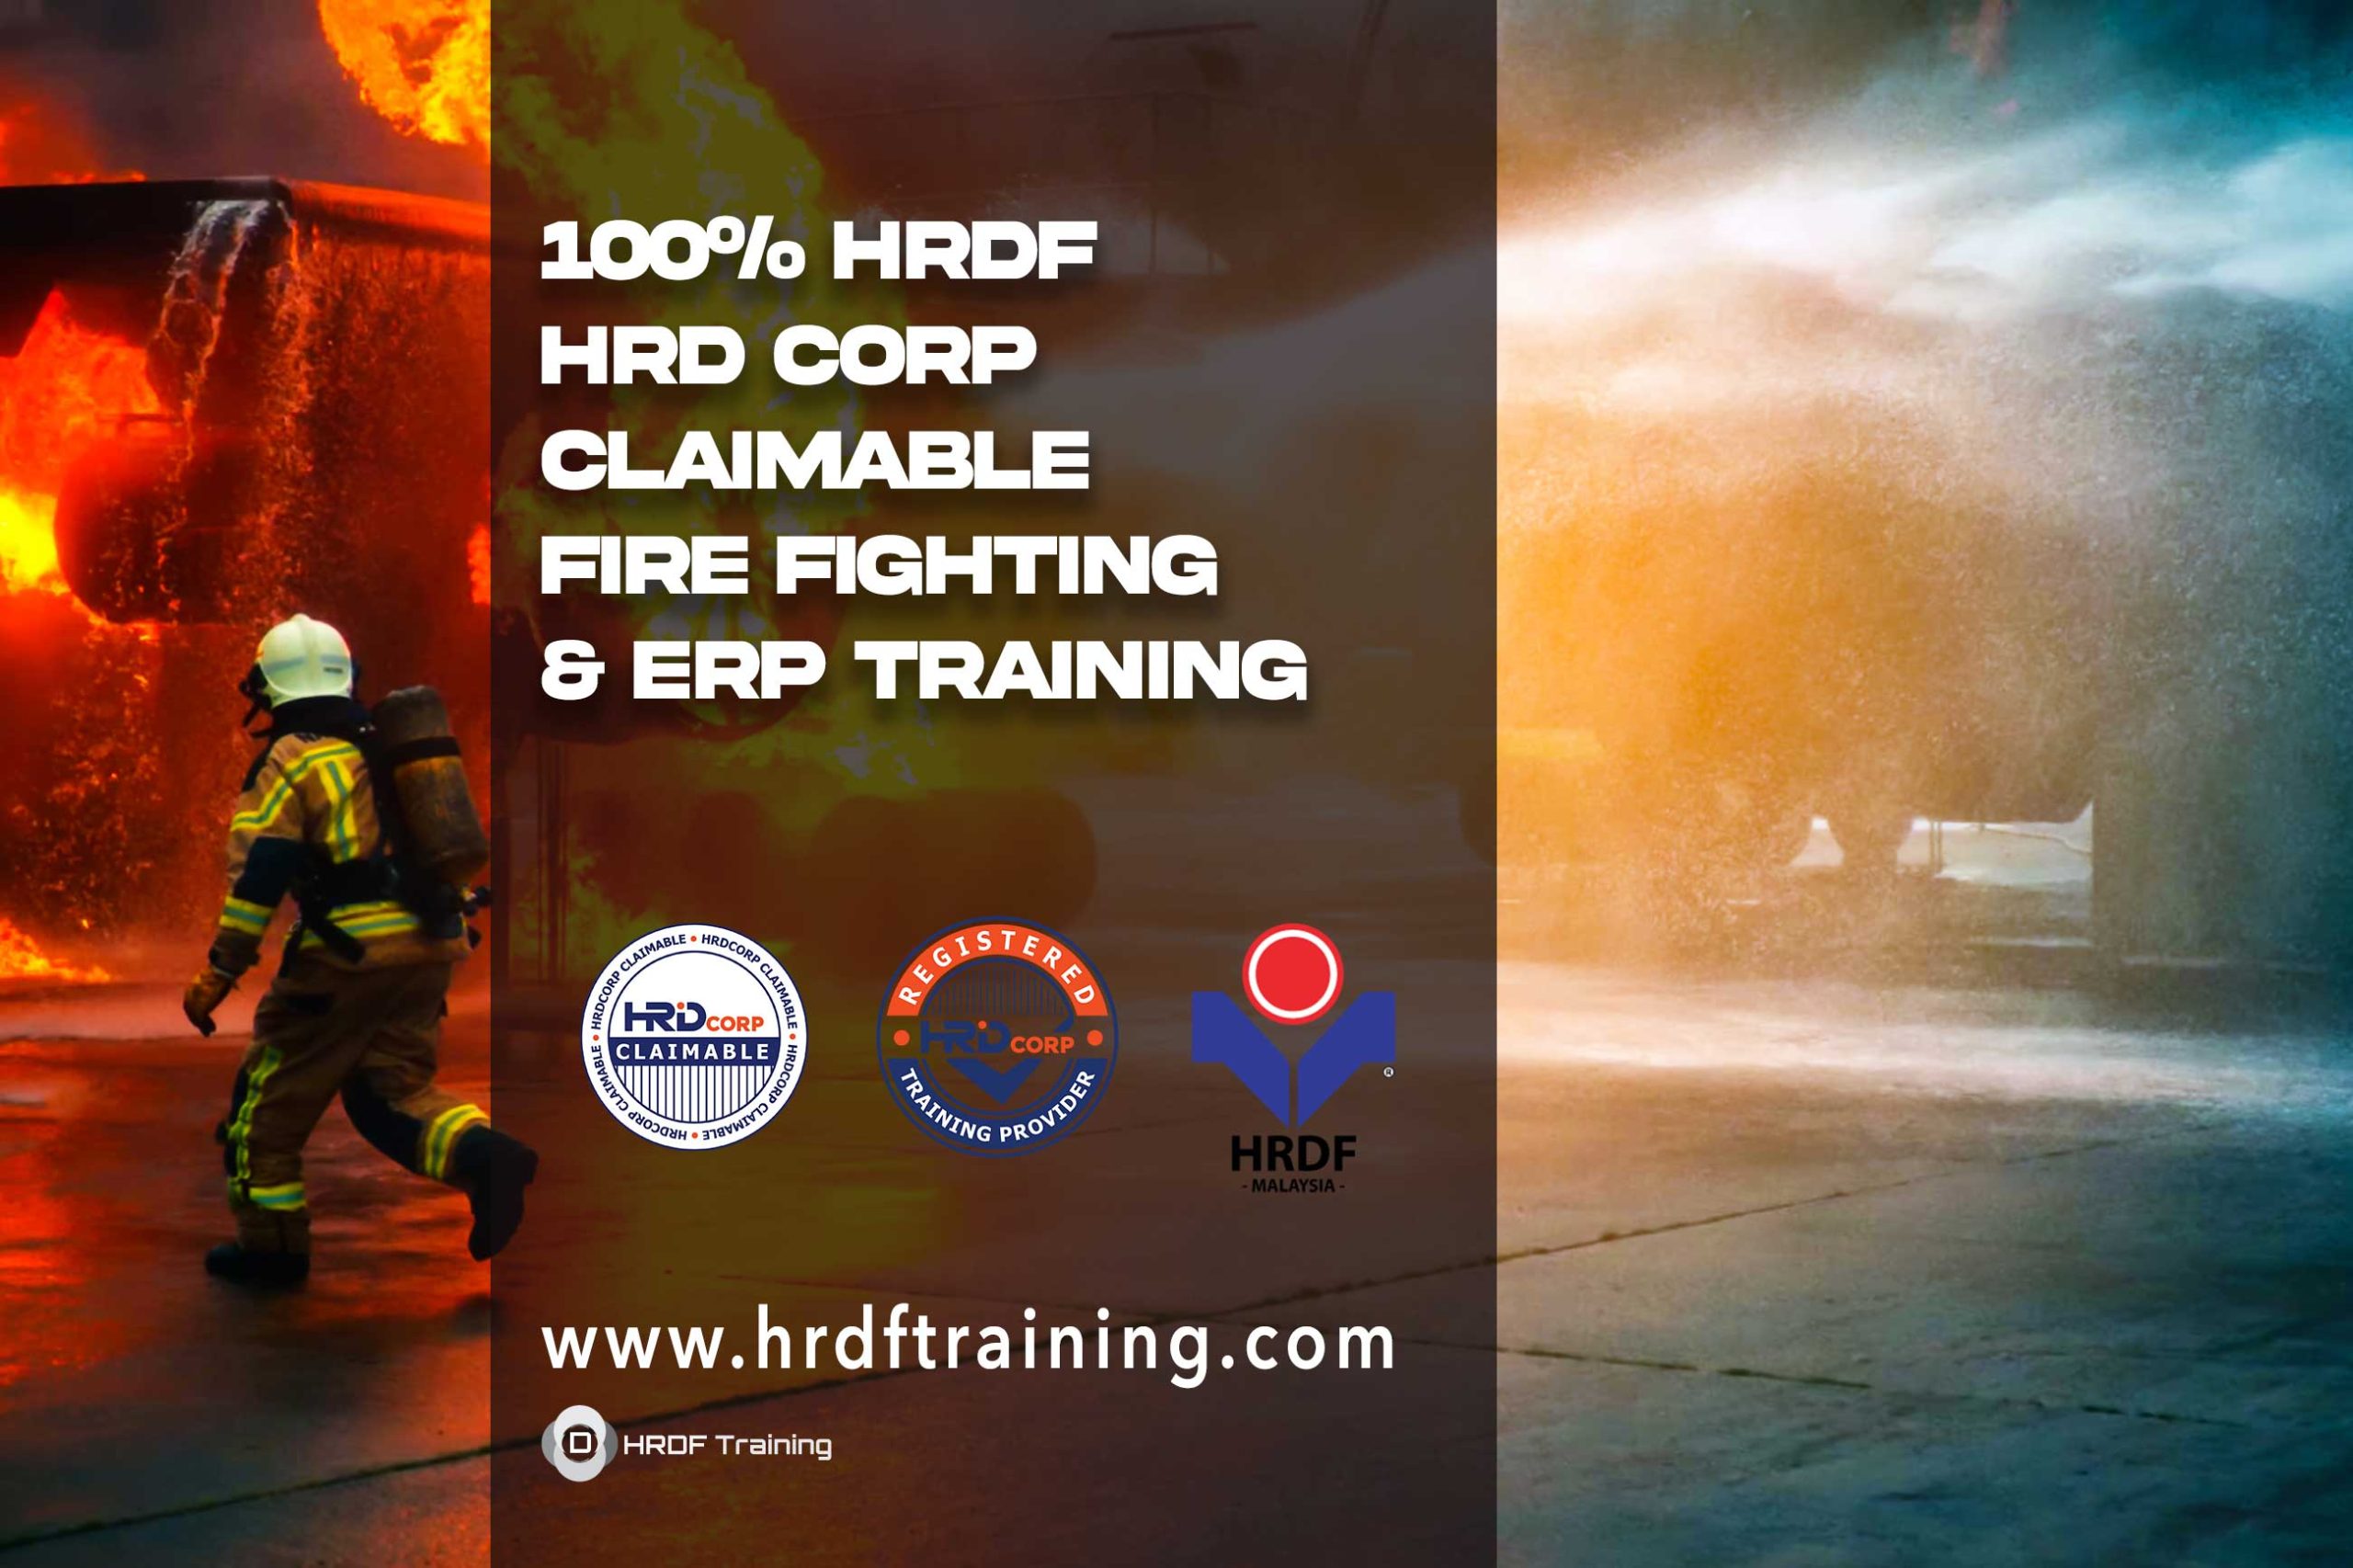 HRDF-HRD-Corp-Claimable-Fire-Fighting-&-ERP-Training